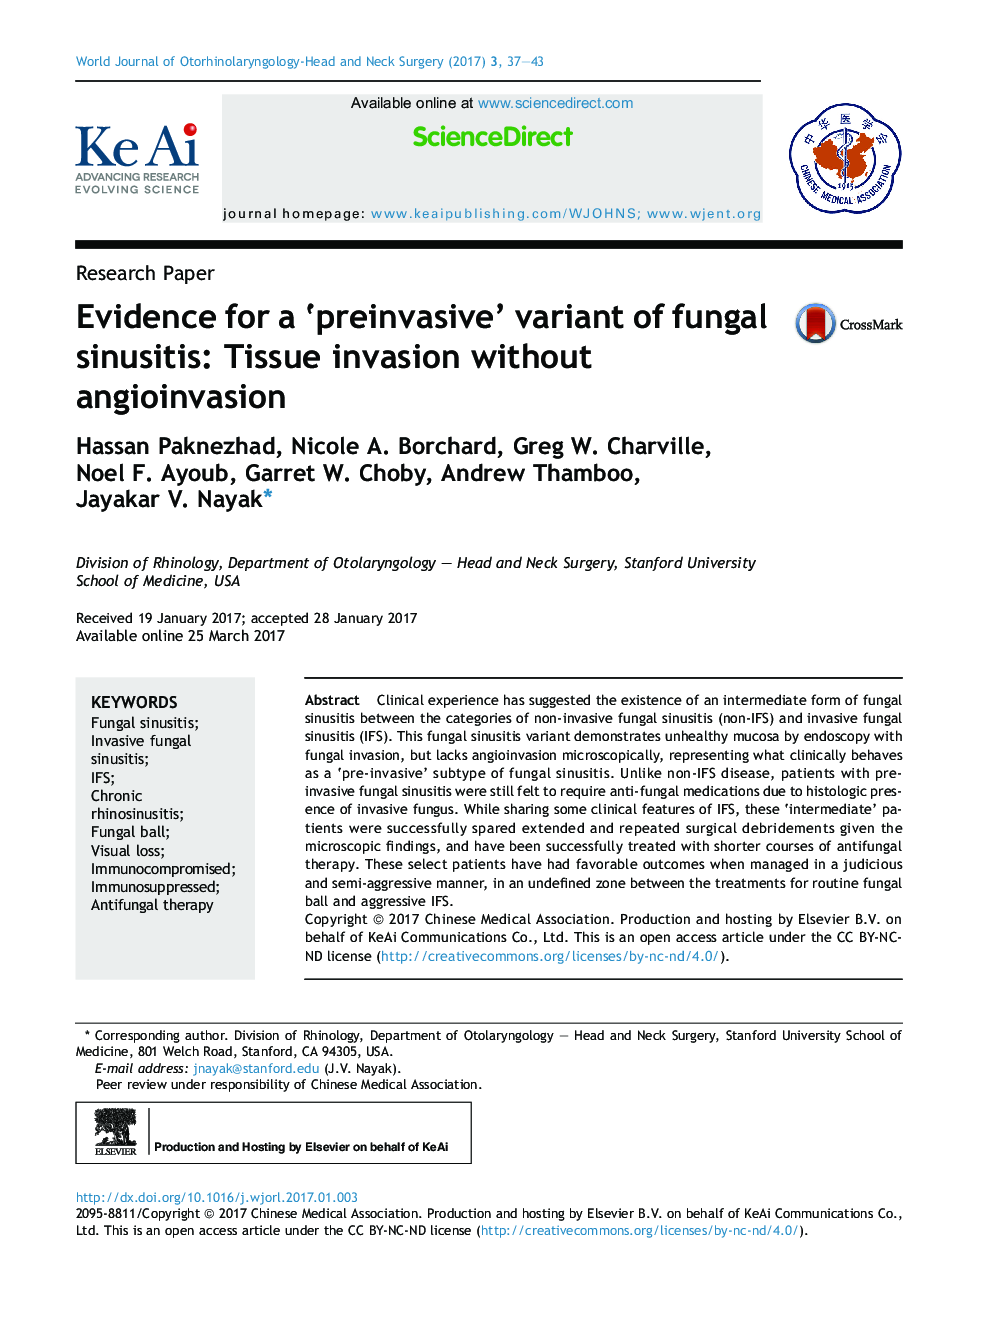 Evidence for a 'preinvasive' variant of fungal sinusitis: Tissue invasion without angioinvasion